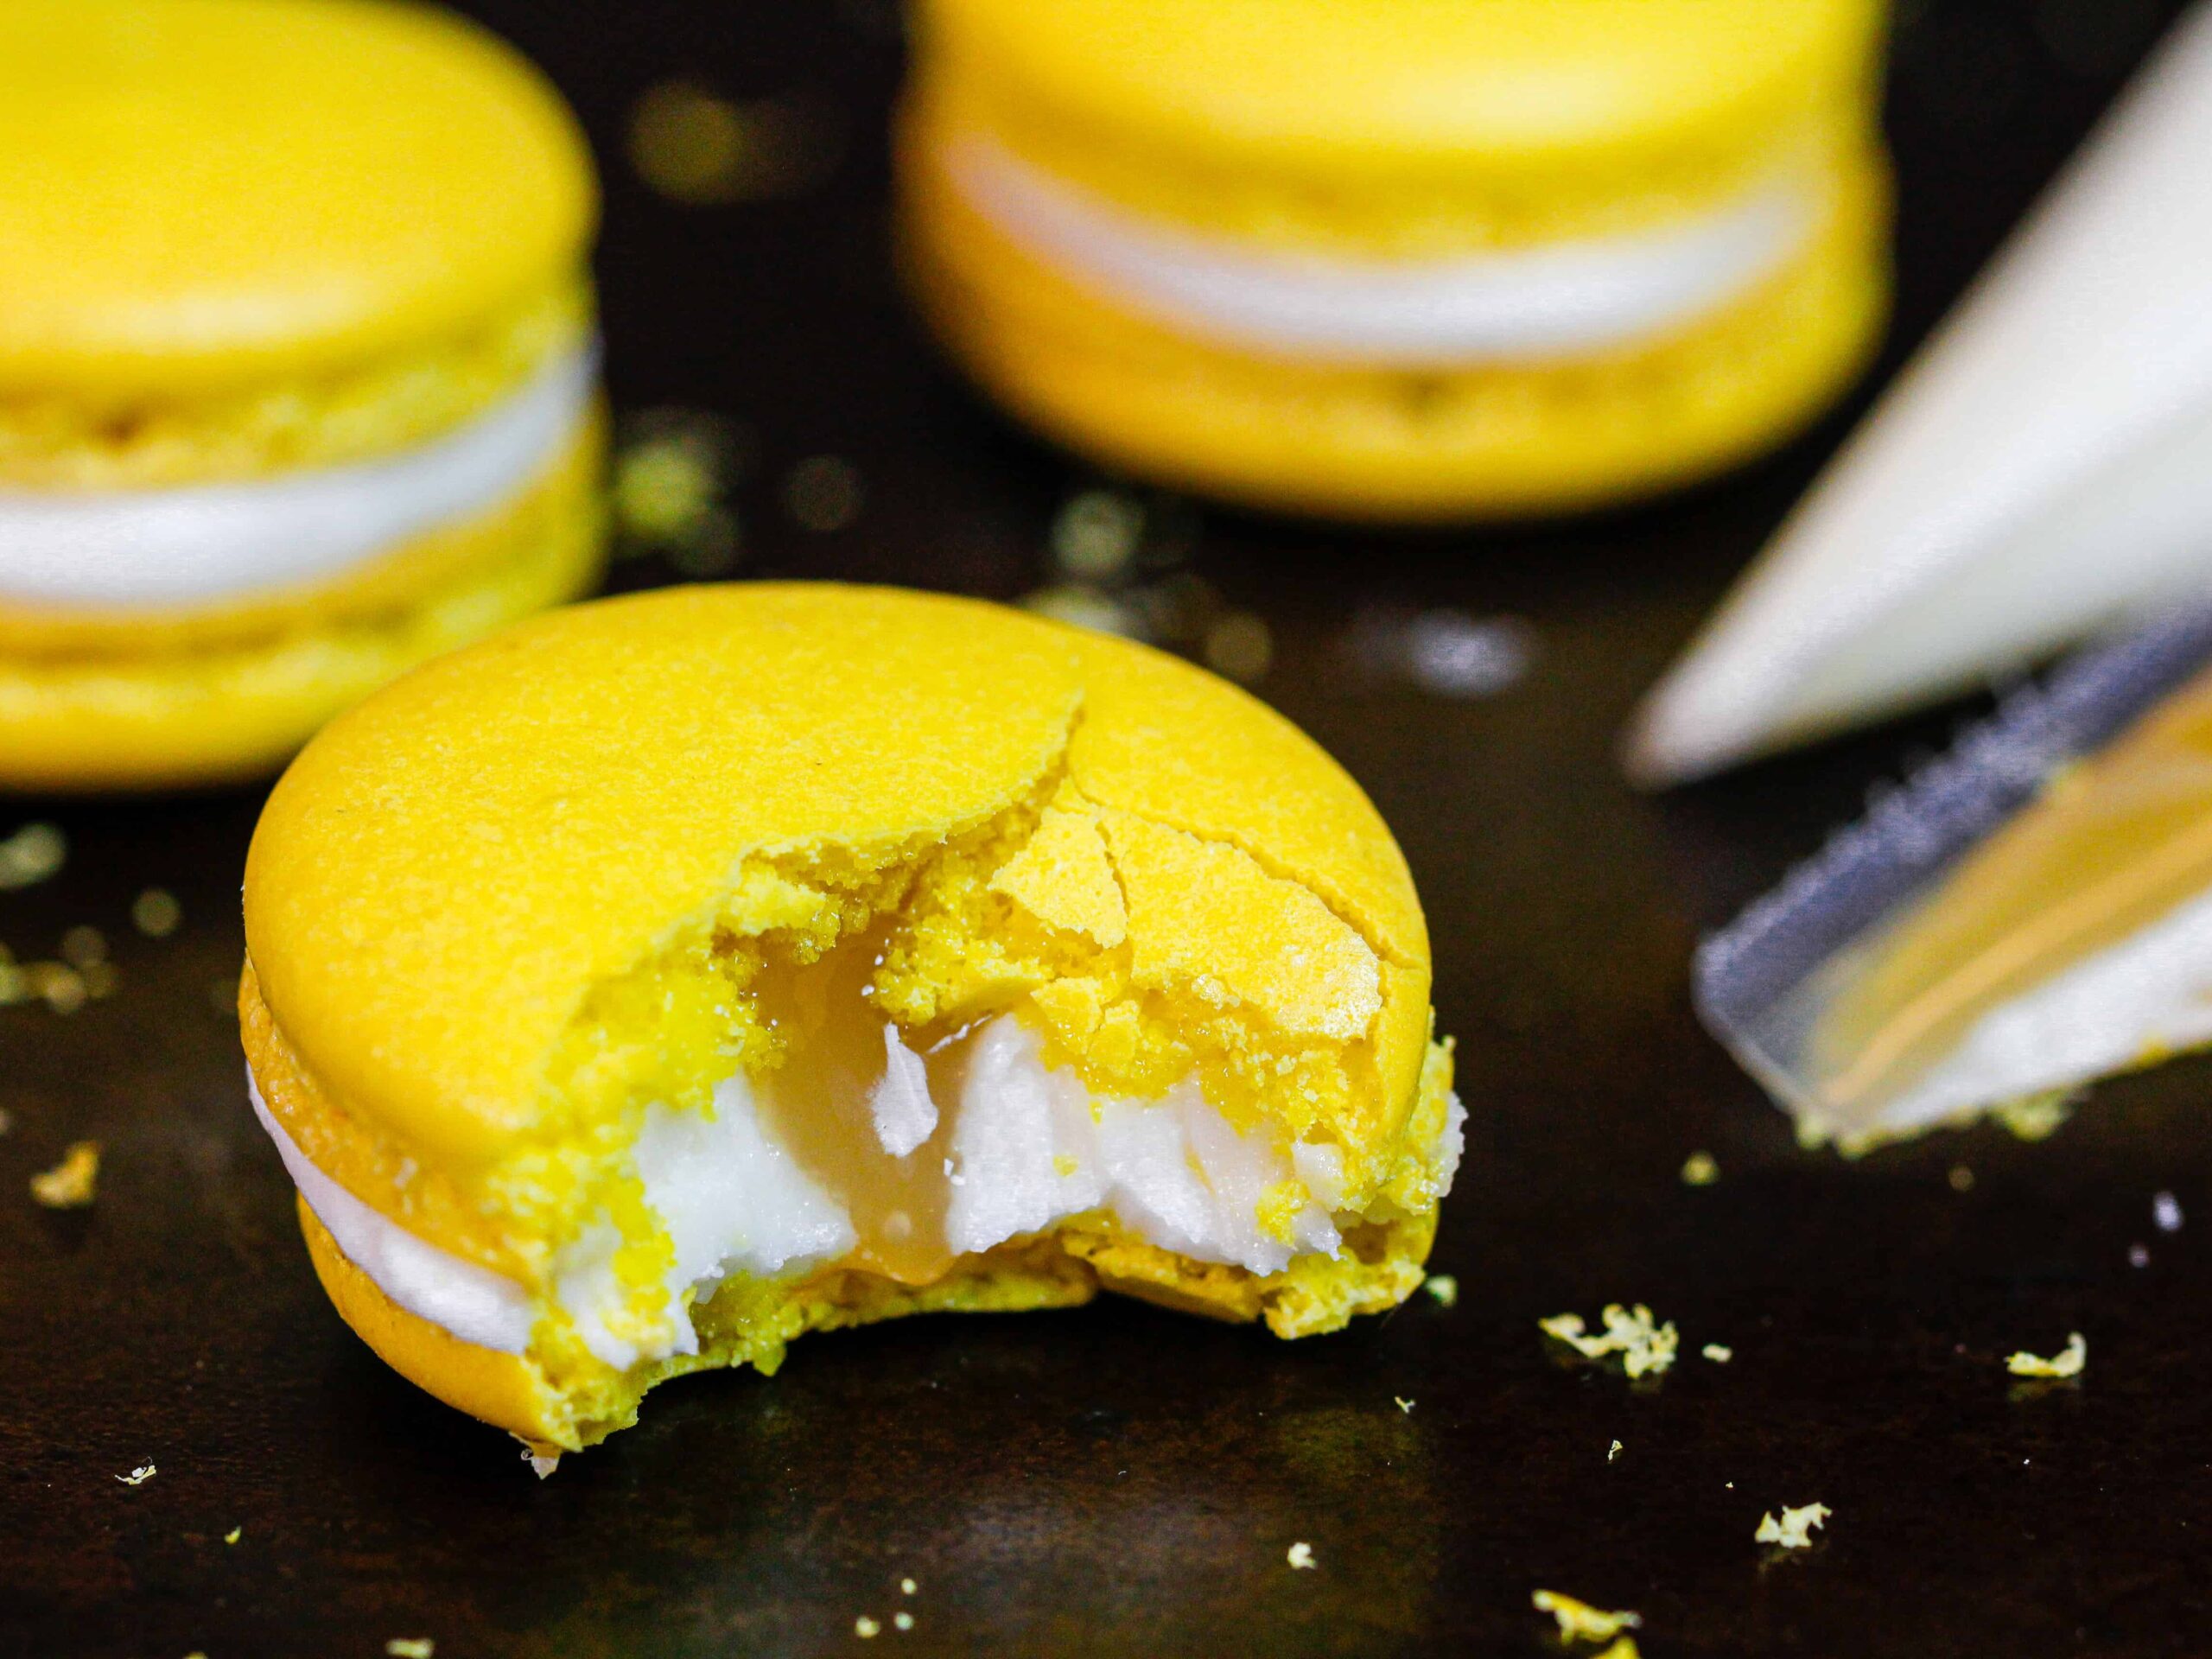 image of a lemon macaron that's been bitten into to show its lemon curd filling and fresh lemon buttercream